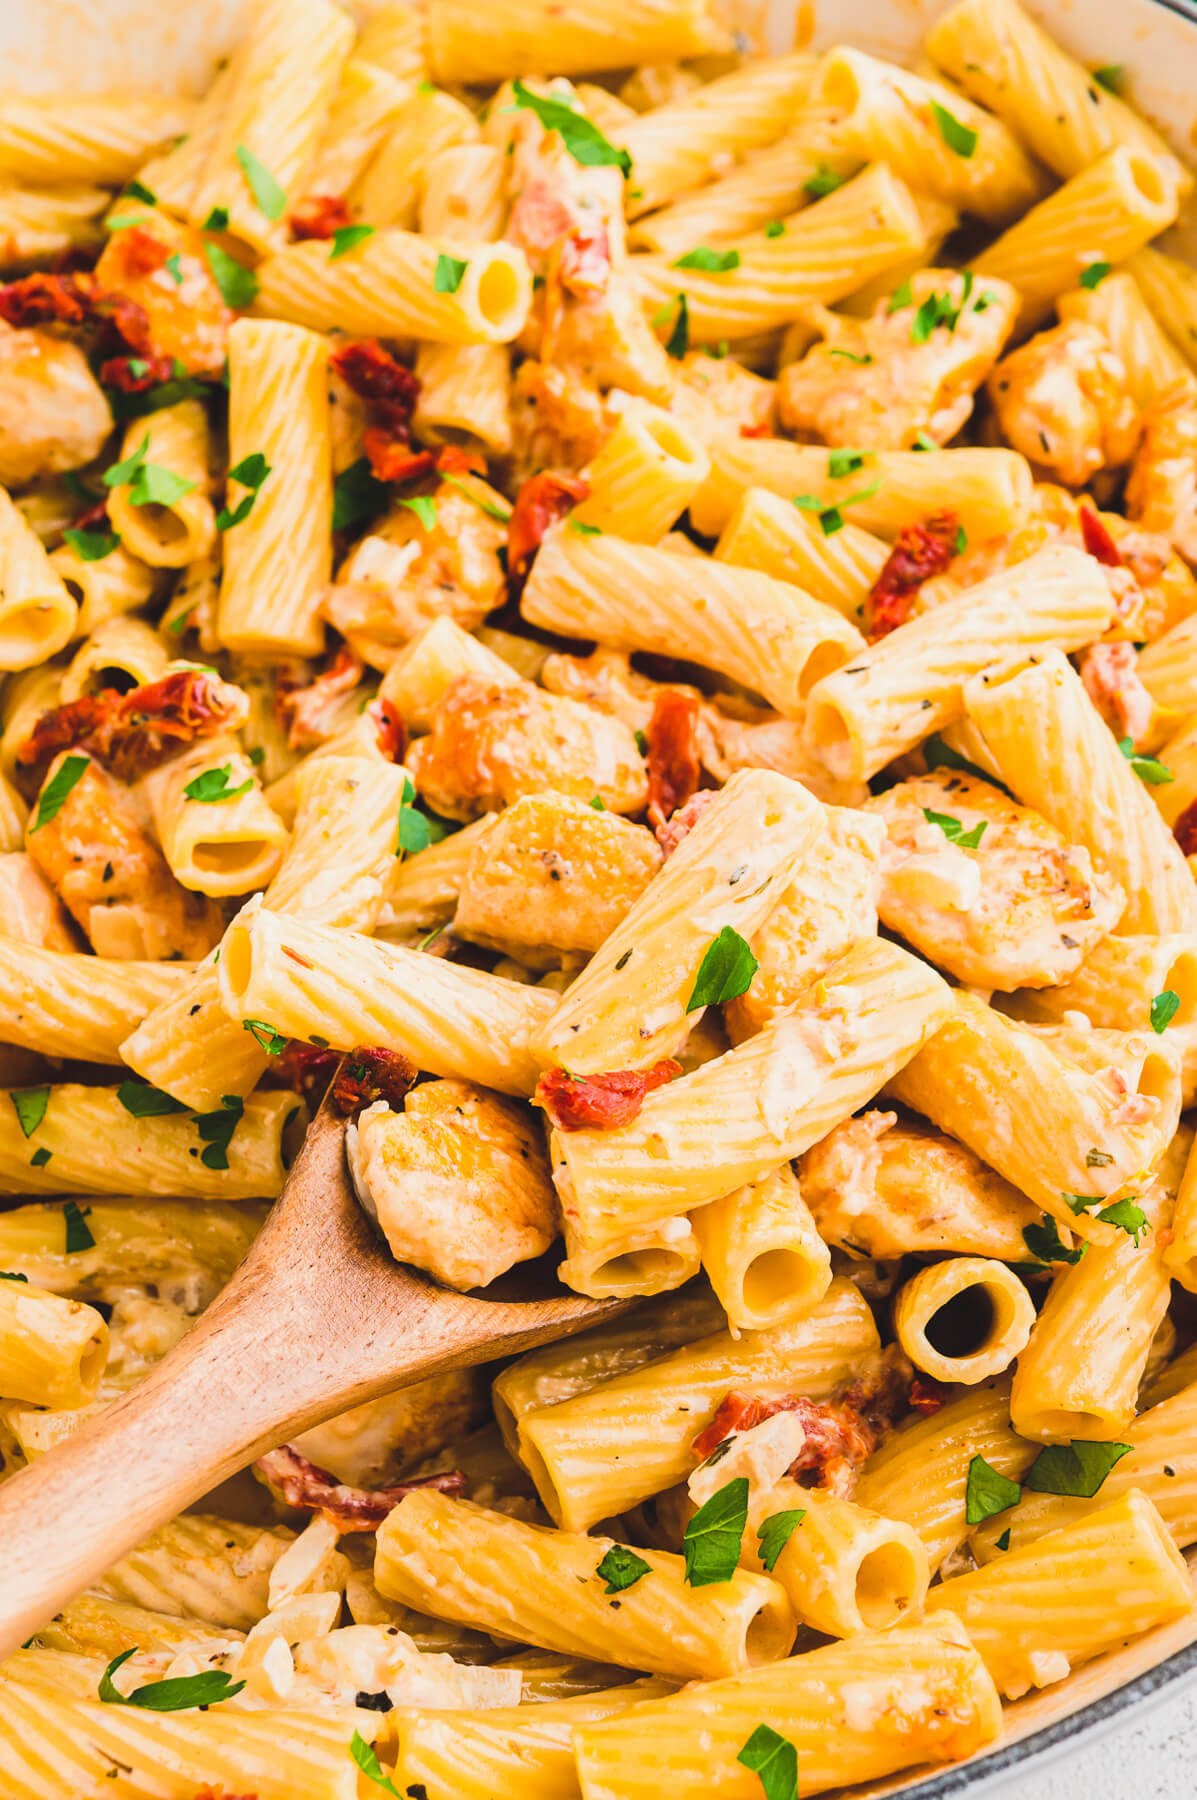 A wooden spoon full of rigatoni pasta, chicken, sun dried tomatoes, and herbs in a creamy pasta sauce.